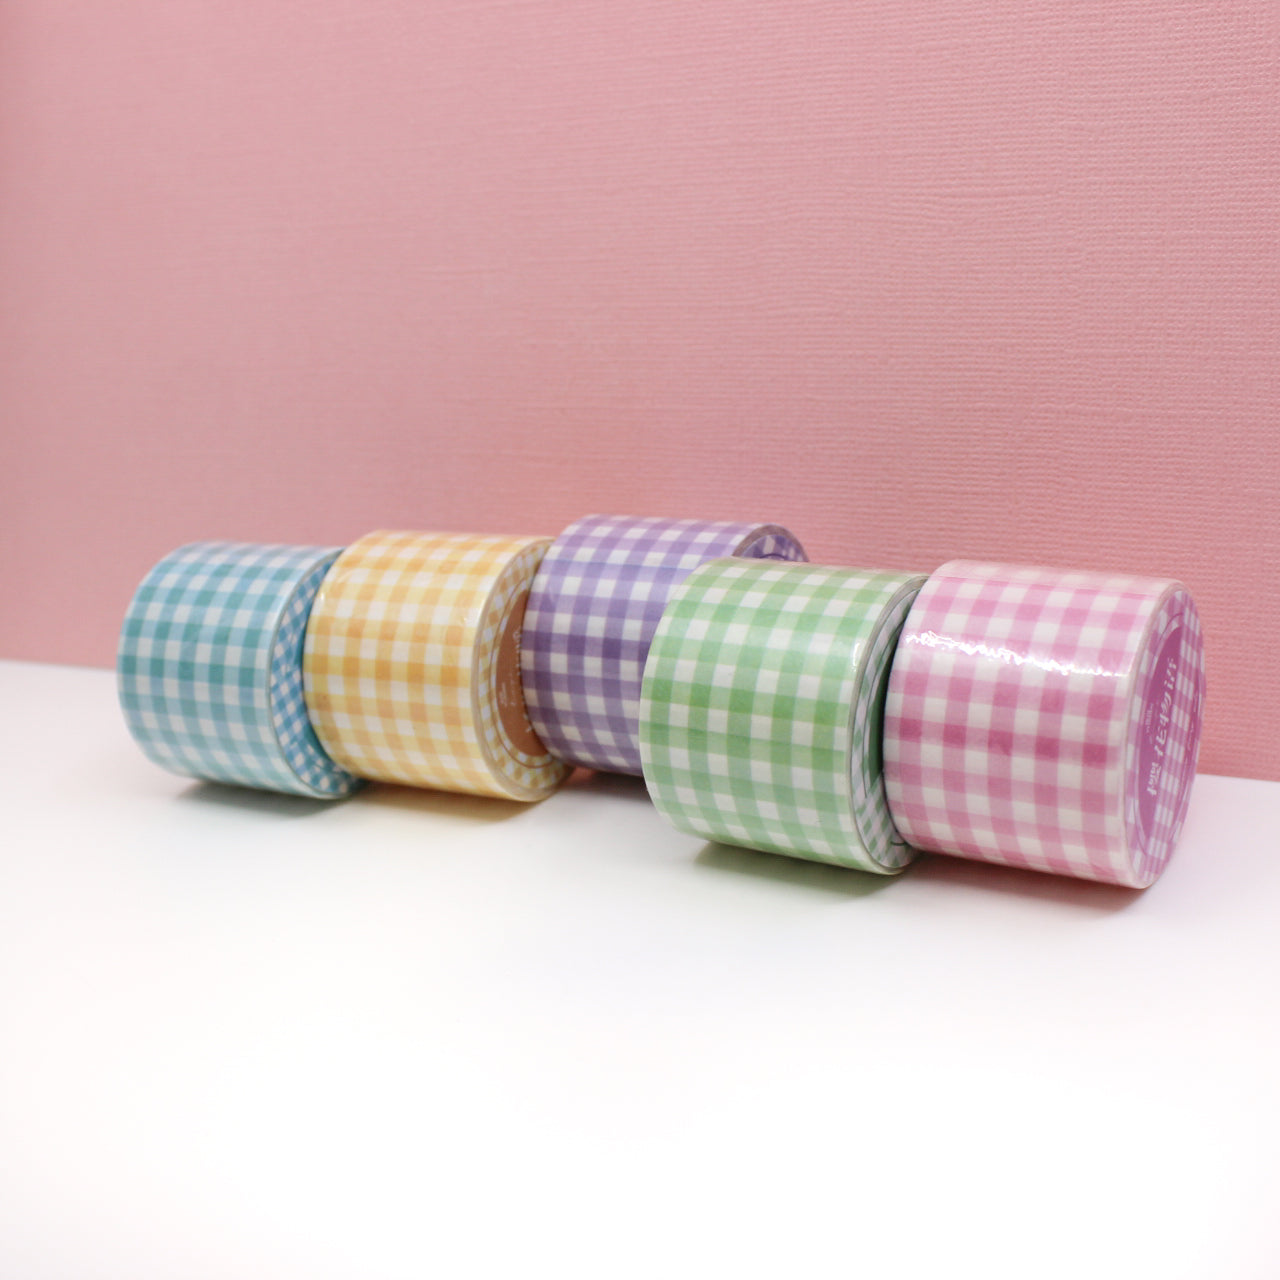 Add a touch of springtime charm to your crafts with our wide plaid washi tape in delightful spring colors, featuring a vibrant and playful plaid pattern perfect for seasonal projects. These tapes are sold at BBB Supplies Craft Shop.